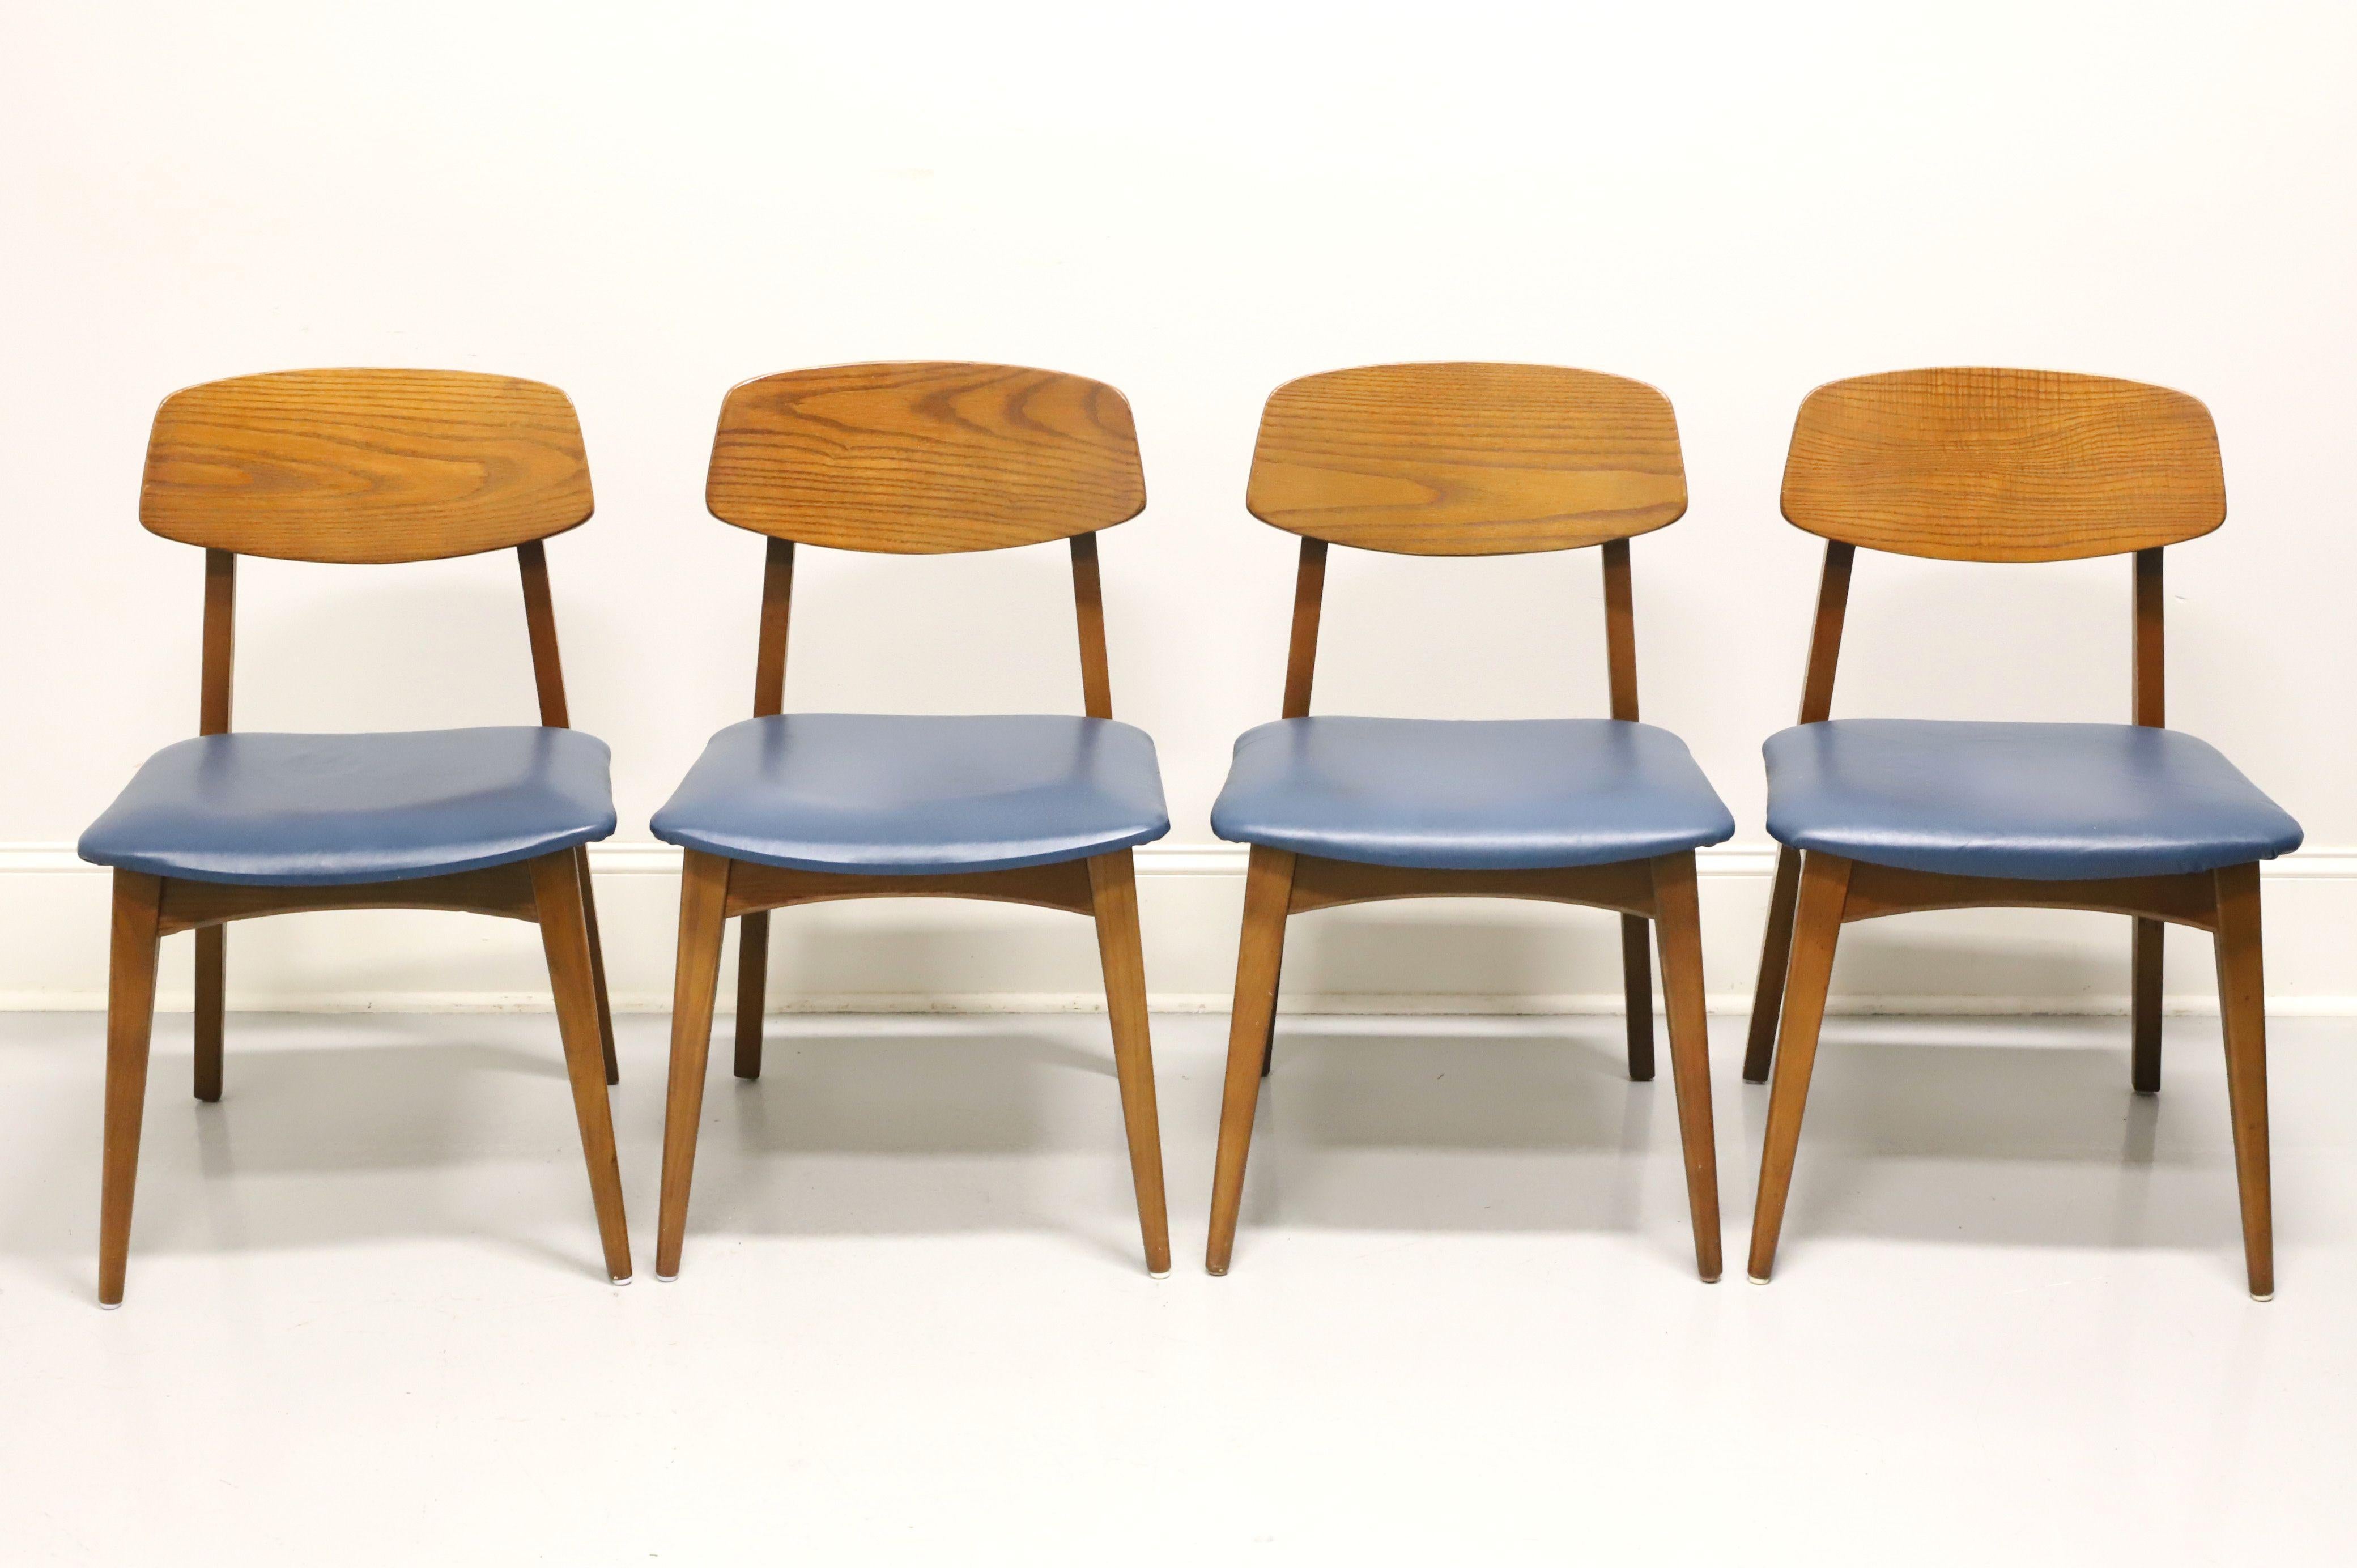 A set of four Mid 20th Century Modern dining side chairs by Heywood Wakefield. Solid oak with curved backrest, blue vinyl upholstered seat and tapered legs. Made in Gardner, Massachusetts, USA, in the mid 20th Century.

Measures: Overall: 18.5w